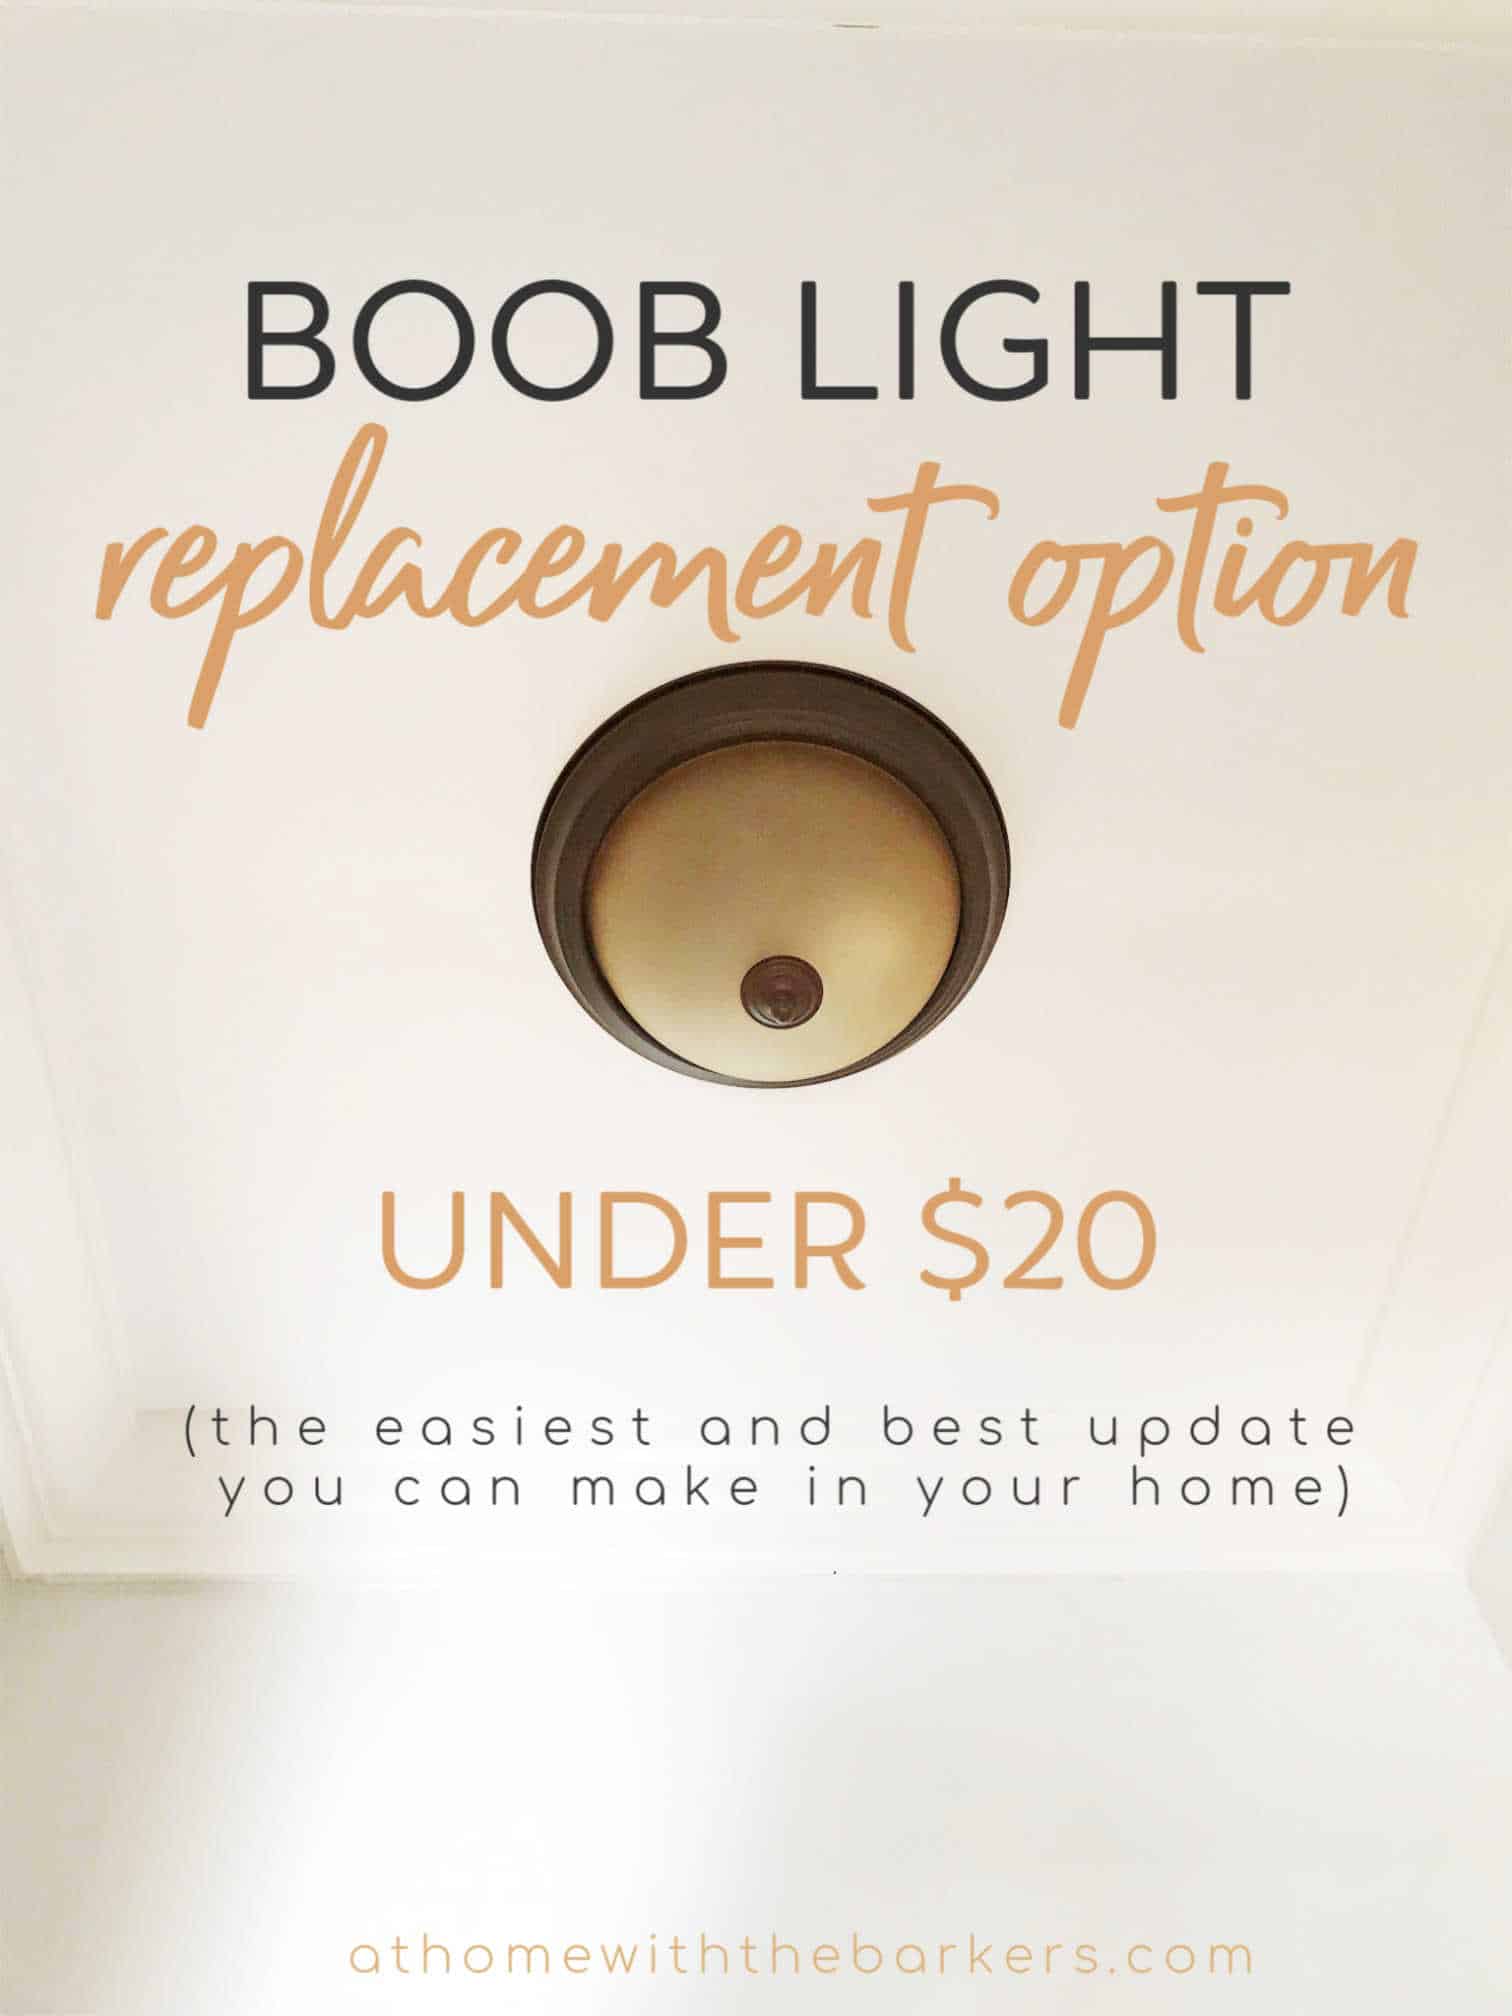 How To Update Boob Lights With Led Slim Recessed Light Kit At Home With The Barkers